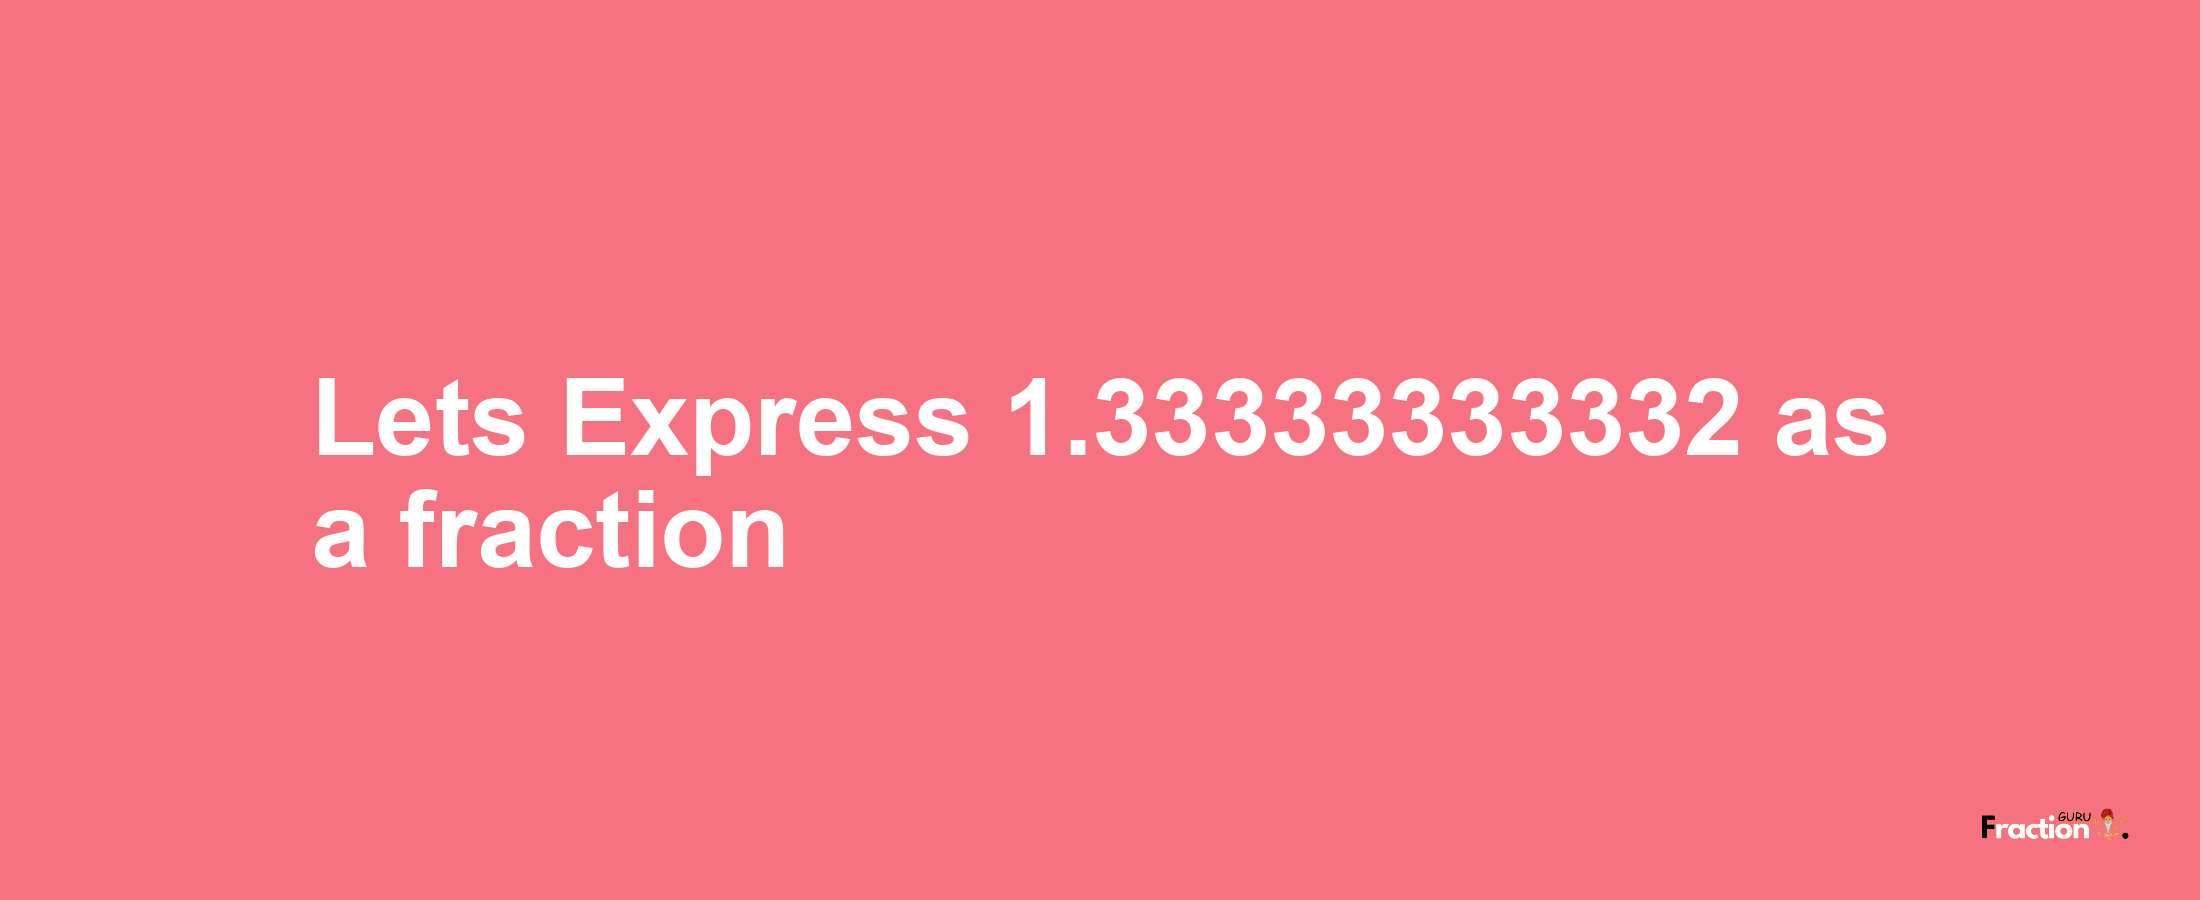 Lets Express 1.33333333332 as afraction